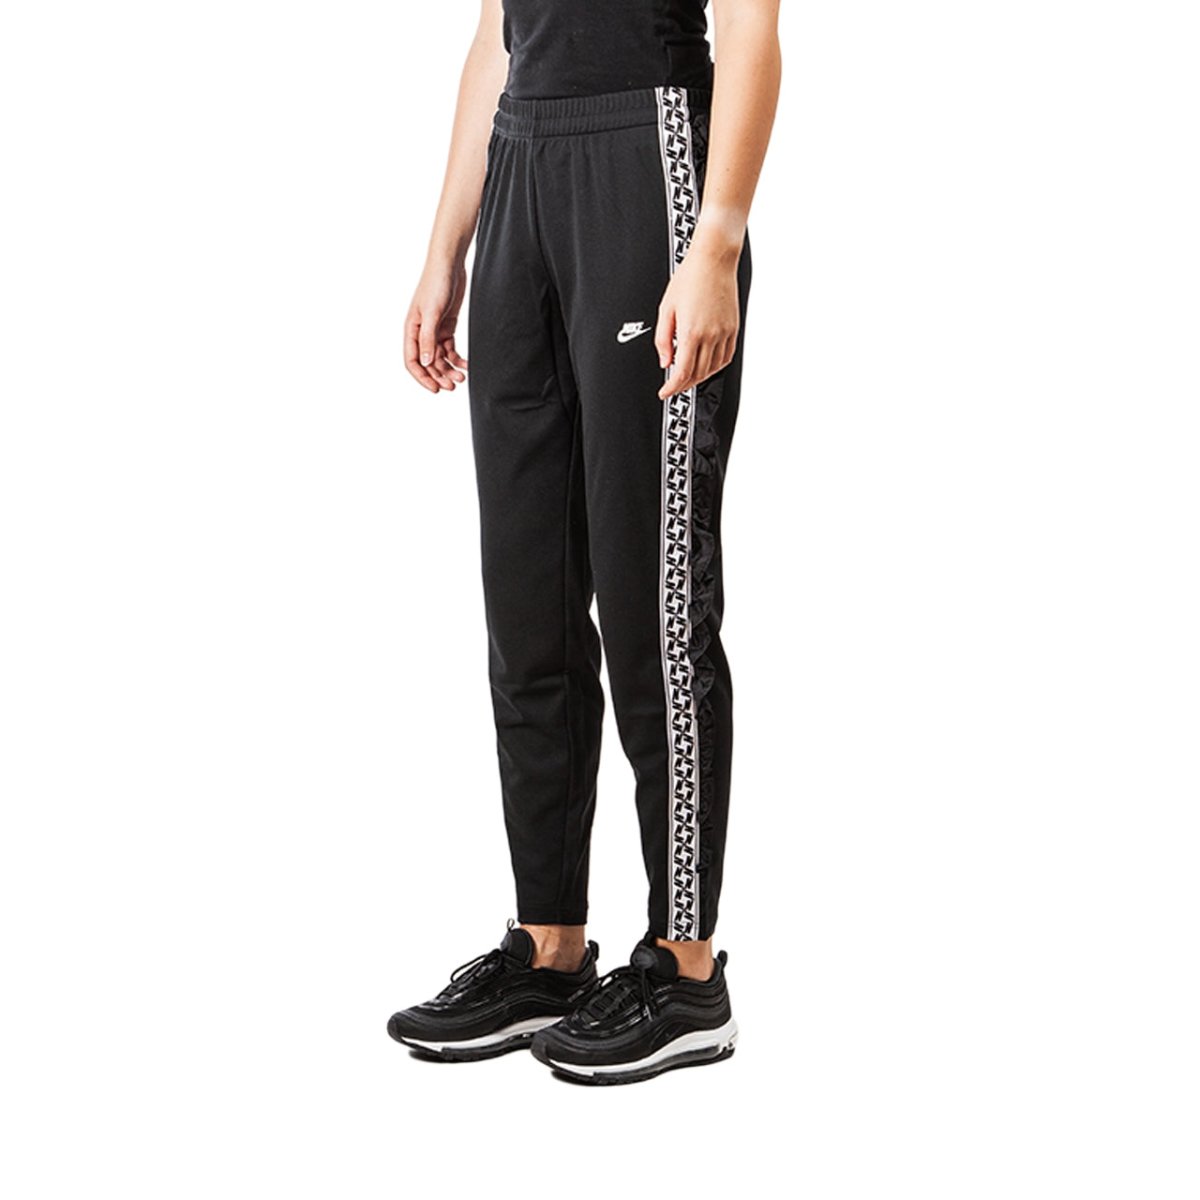 Nike WMNS NSW Taped Poly Pant (Schwarz)  - Allike Store